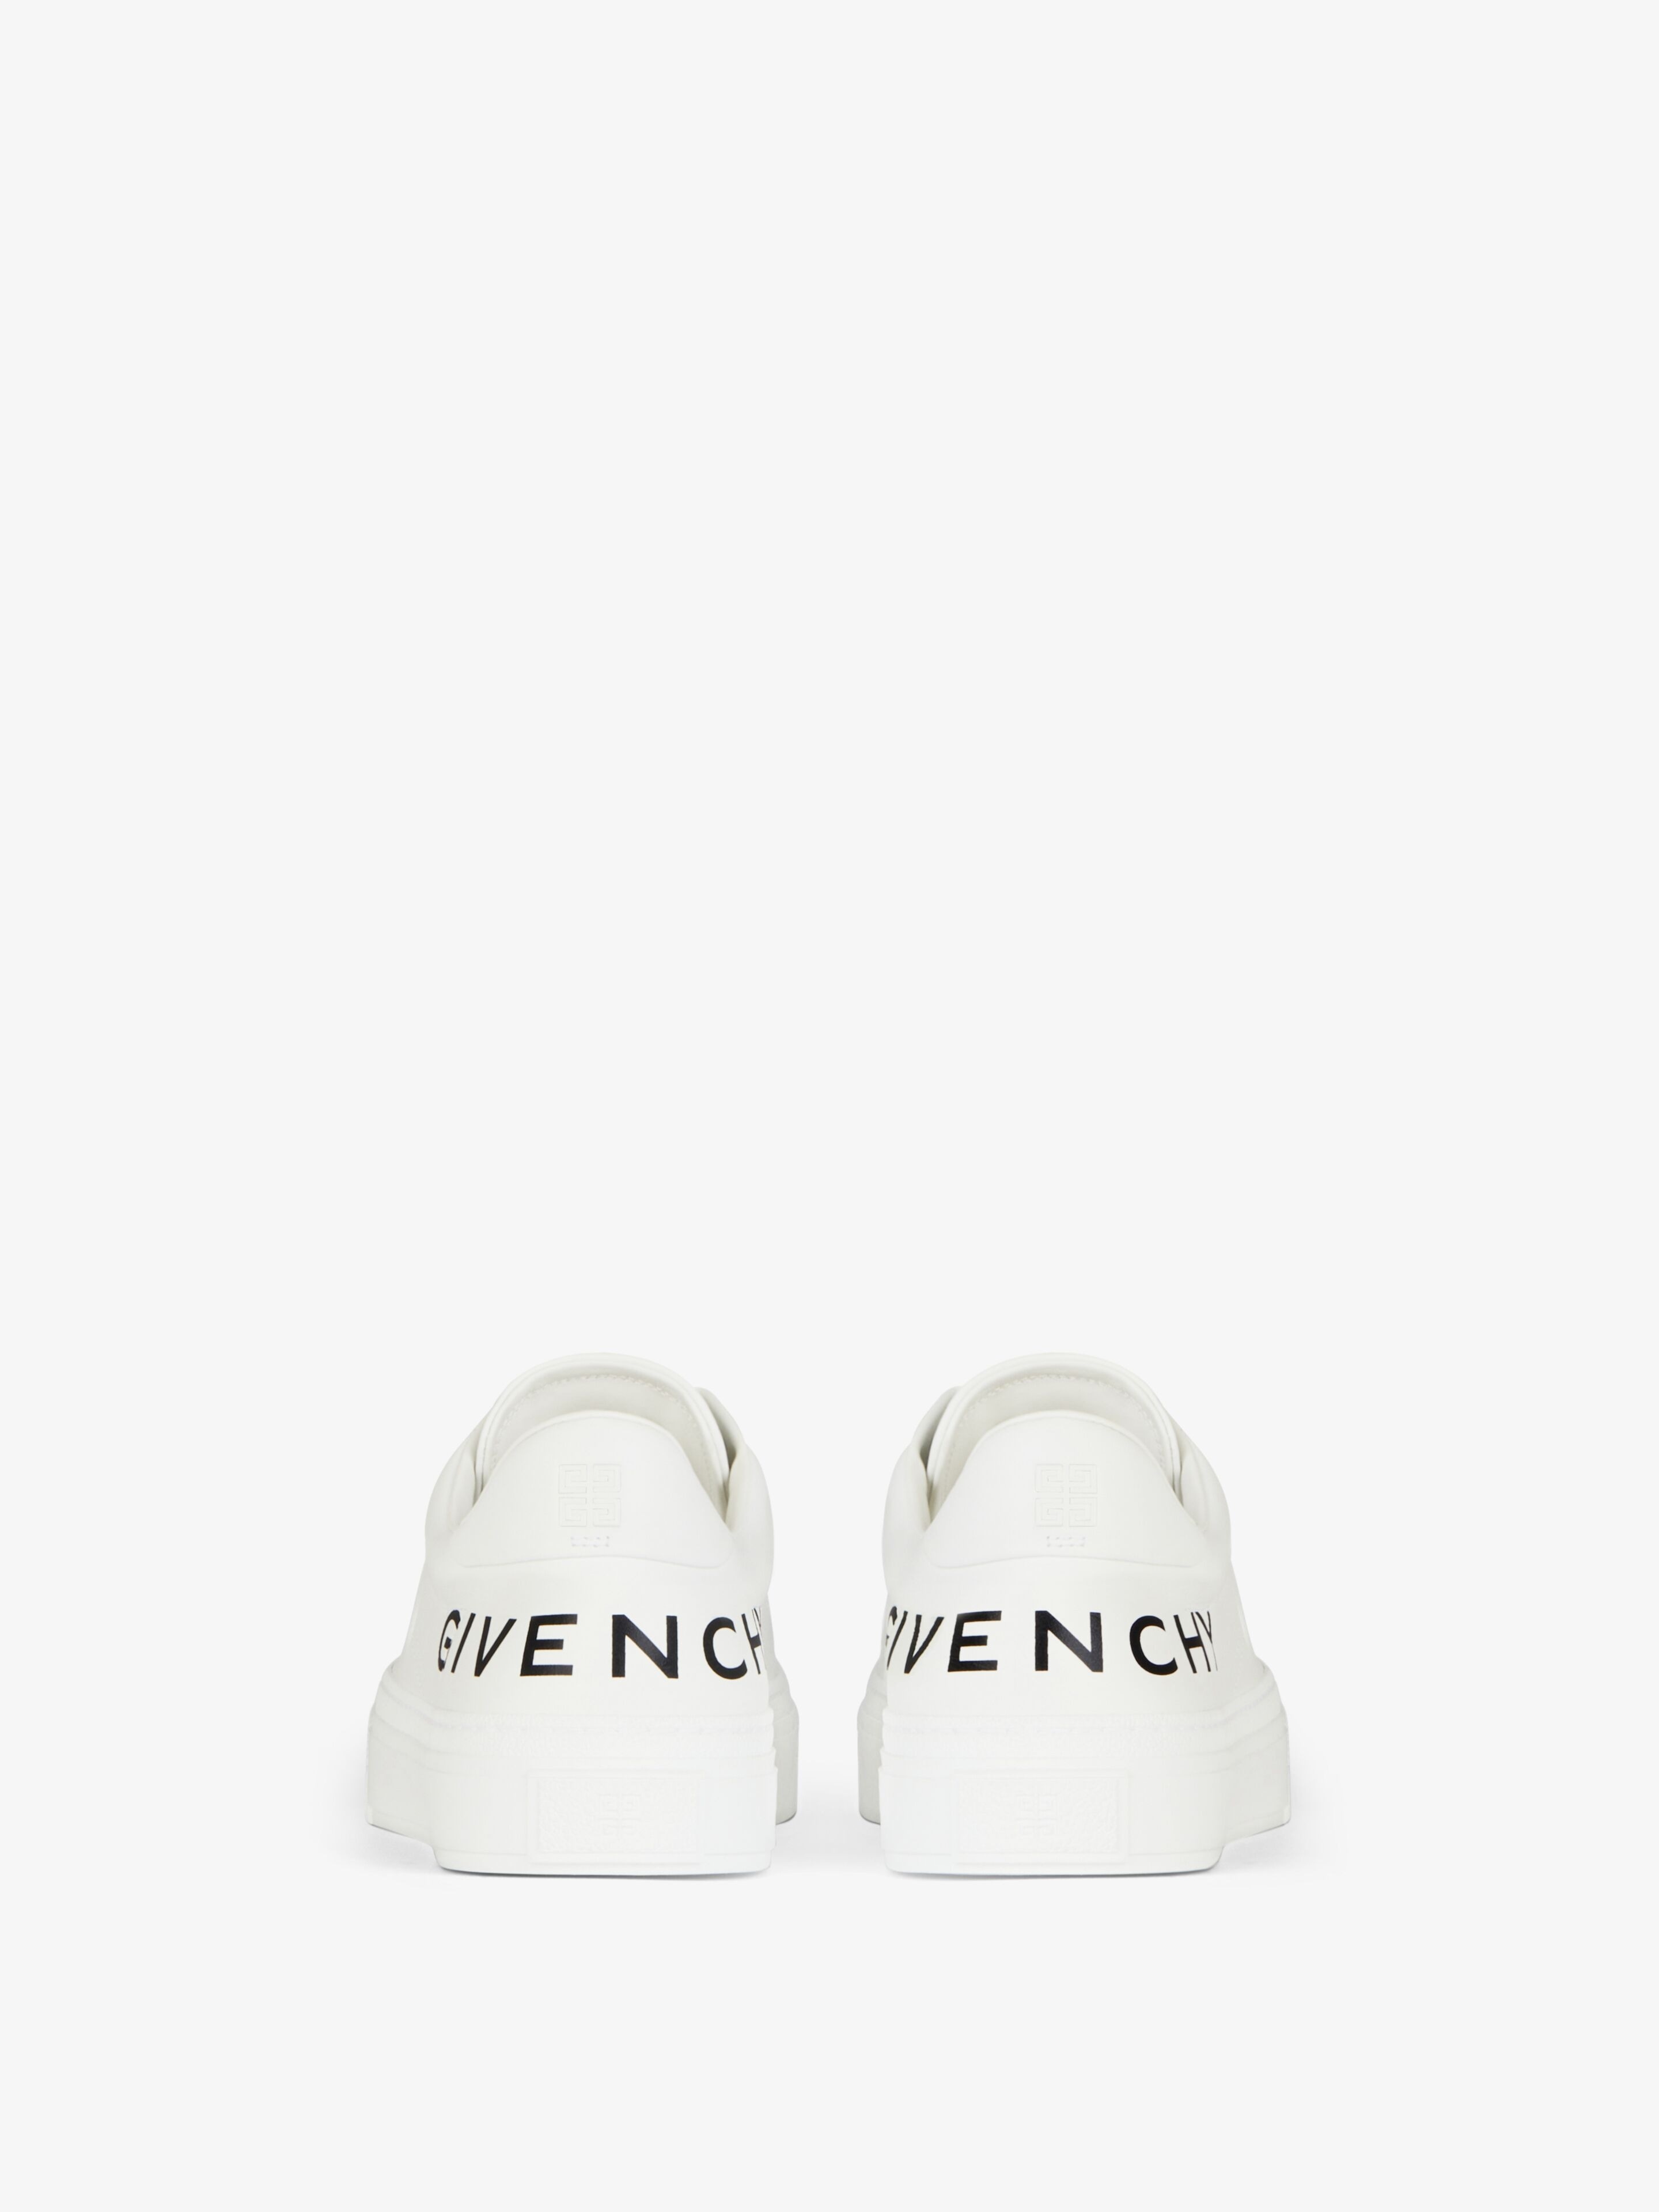 CITY SPORT SNEAKERS IN LEATHER WITH PRINTED GIVENCHY LOGO - 7